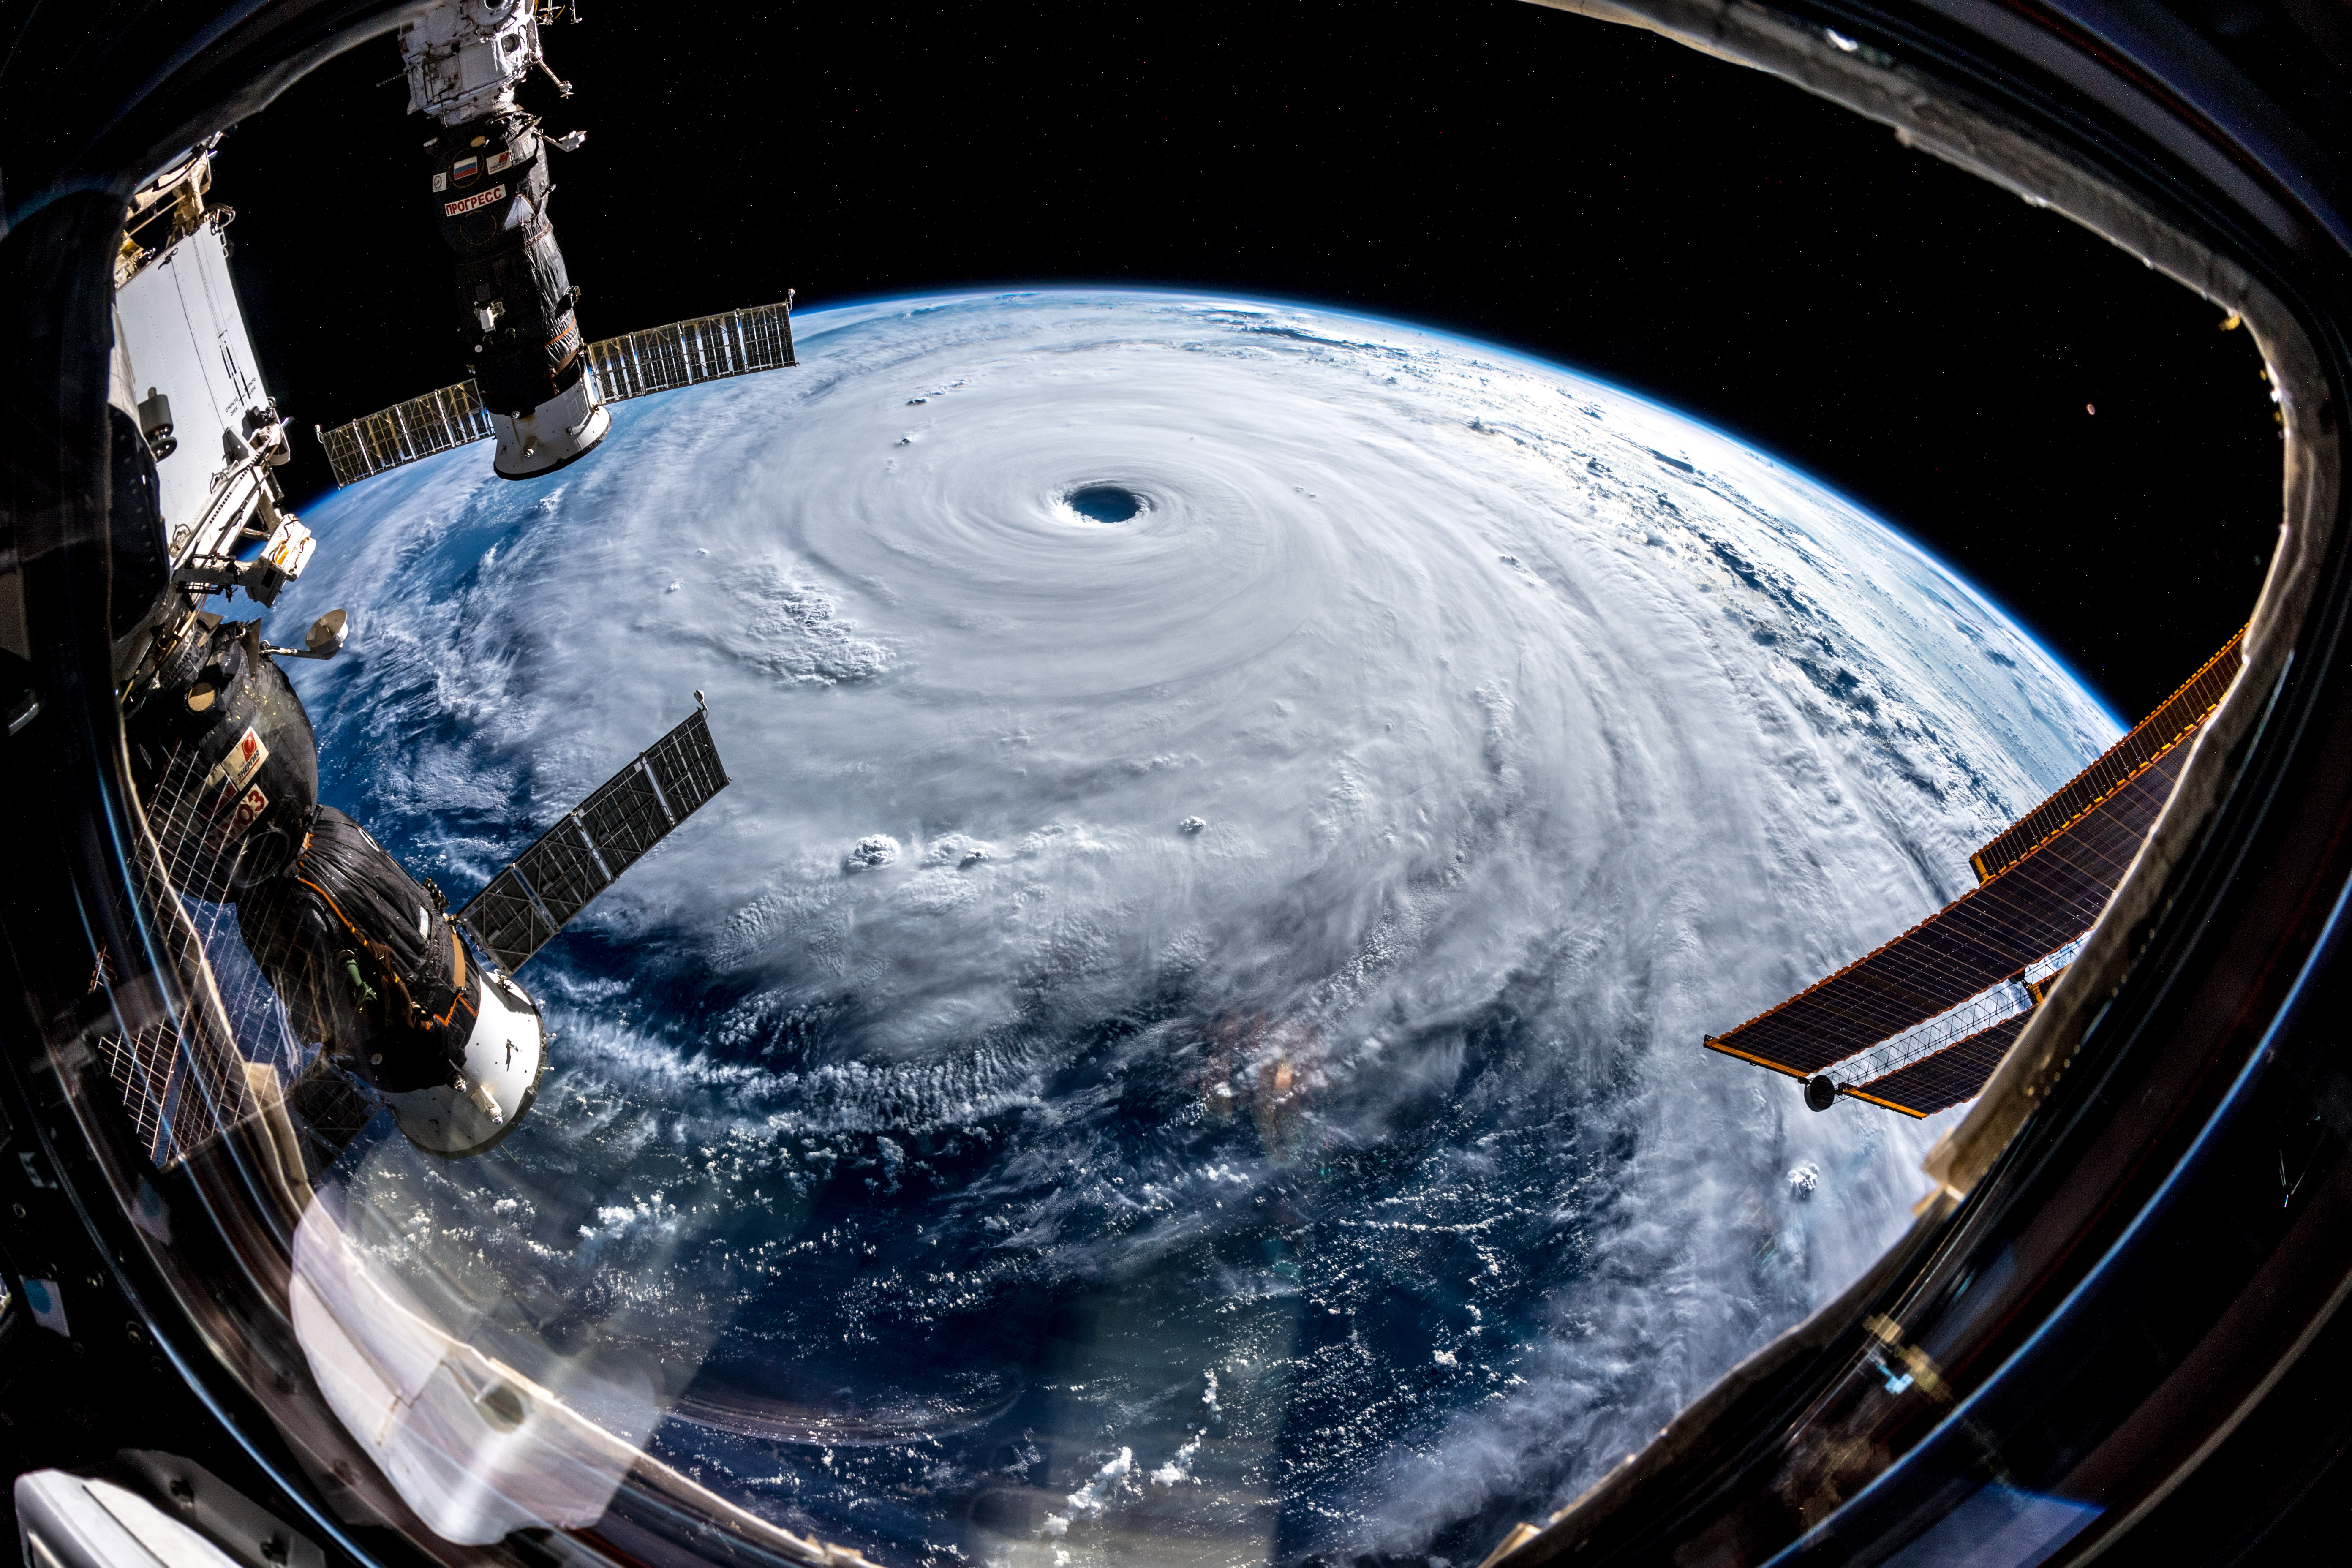 Alexander Gerst Hurricane Typhoon Cyclone Spiral NASA ISS Earth Space Nature Science Space Station C 5568x3712